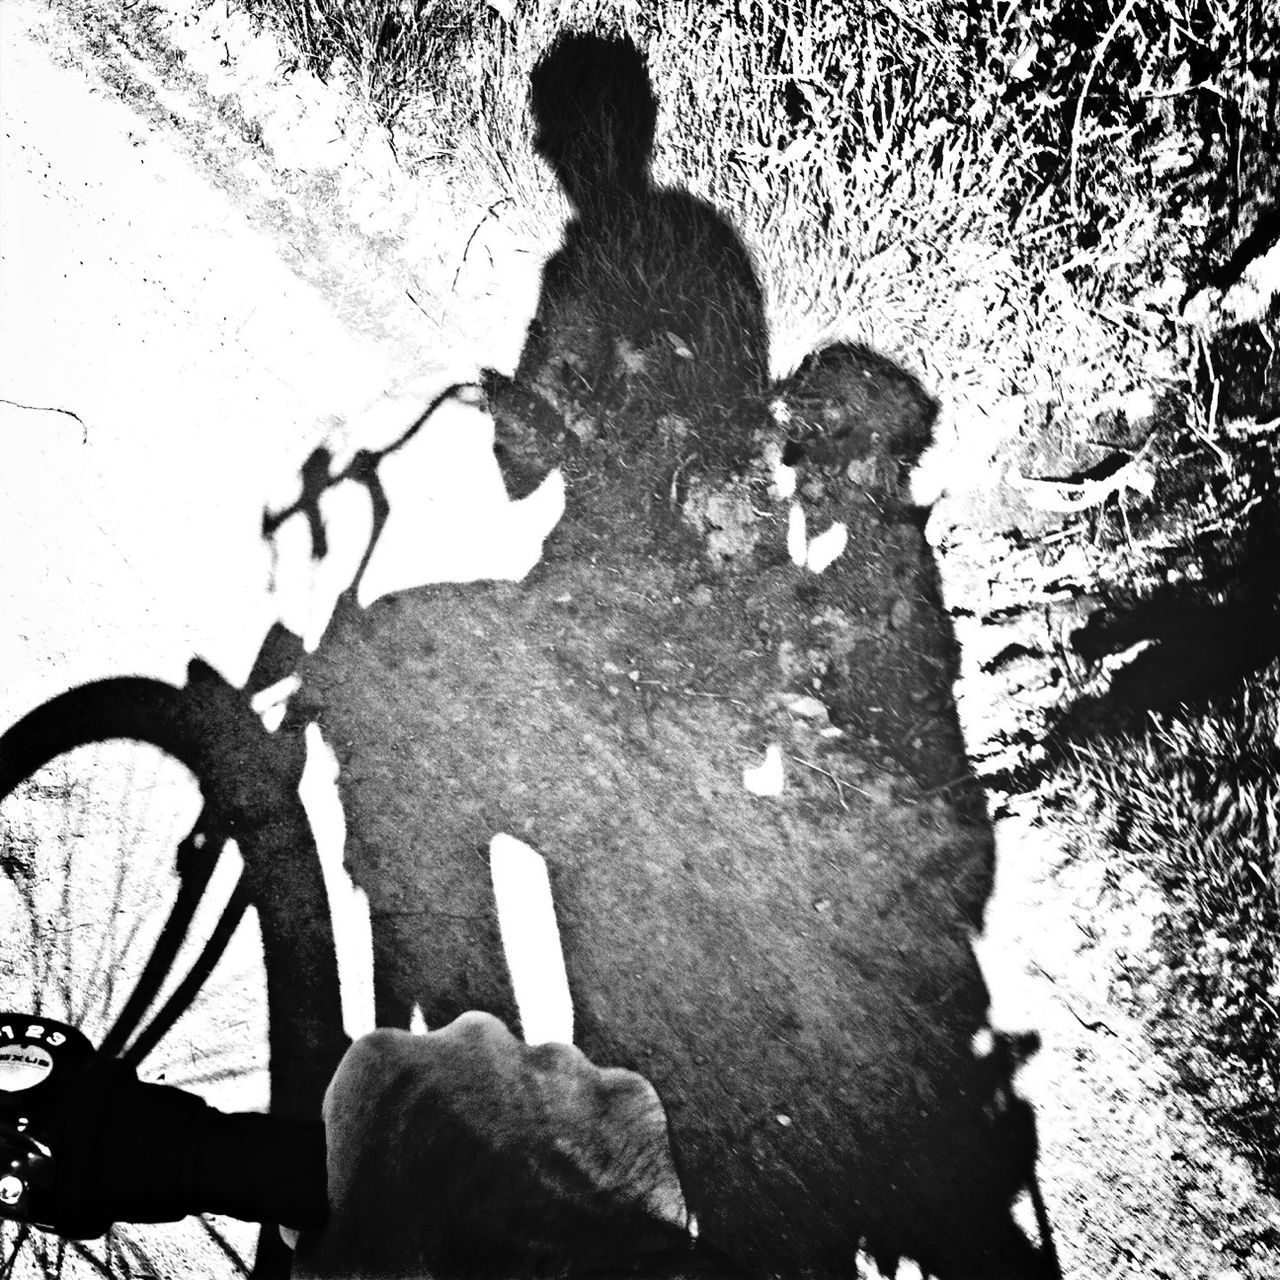 bicycle, lifestyles, leisure activity, silhouette, full length, men, shadow, tree, outdoors, side view, childhood, holding, boys, sunlight, day, standing, riding